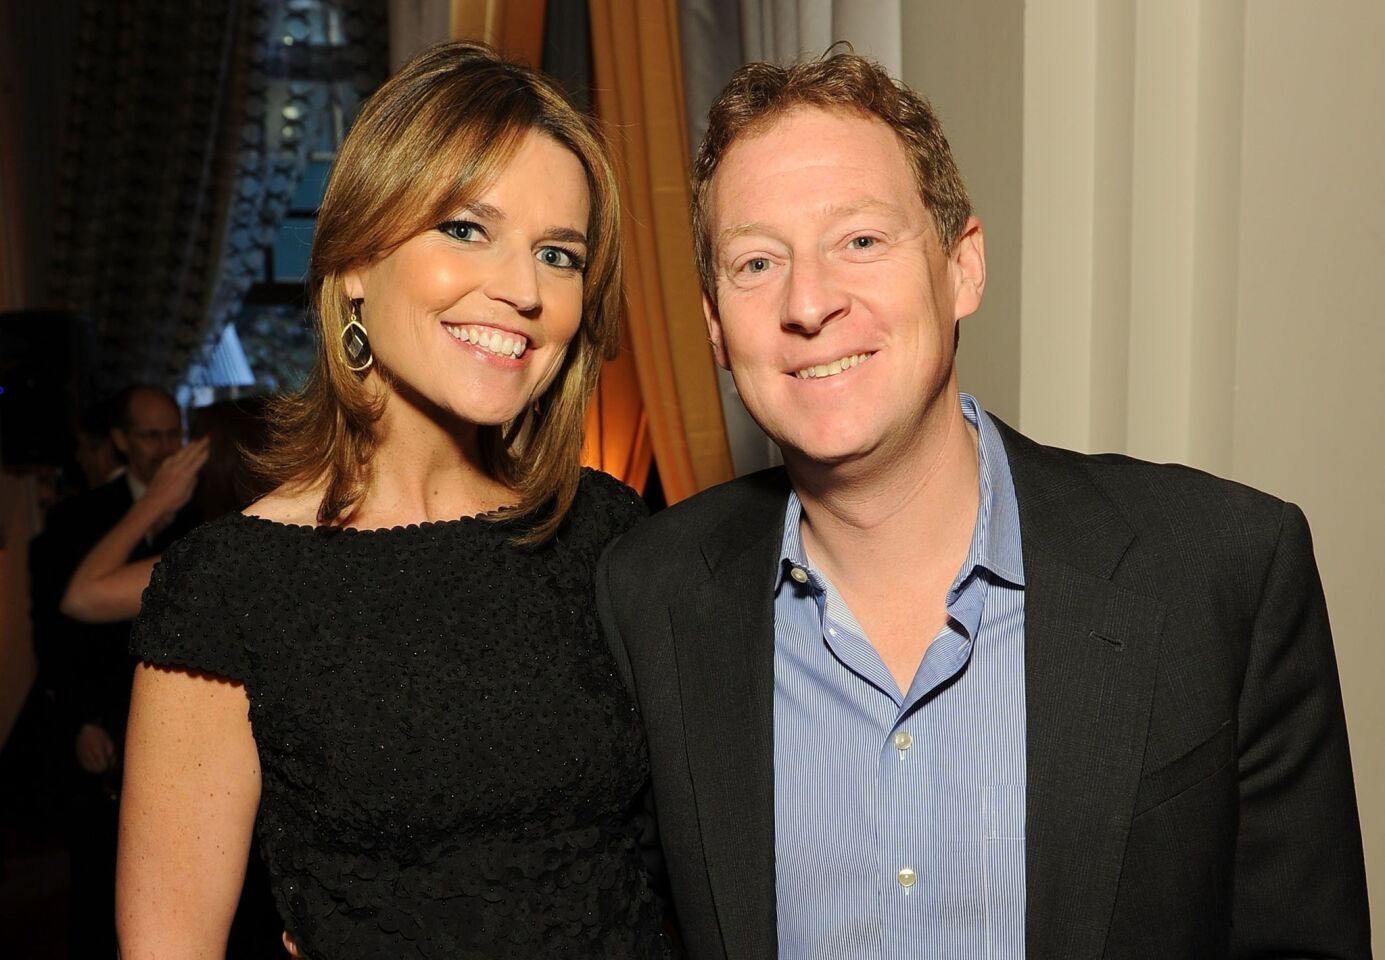 "Today" show host Savannah Guthrie not only got married in March, but she and her new husband, Mike Feldman, broke some huge news during their reception: They're having a baby. Guthrie, who was four months along when she made the announcement at their Tucson nuptials, shared additional details about the wedding and the pregnancy just two days later on the "Today" show.